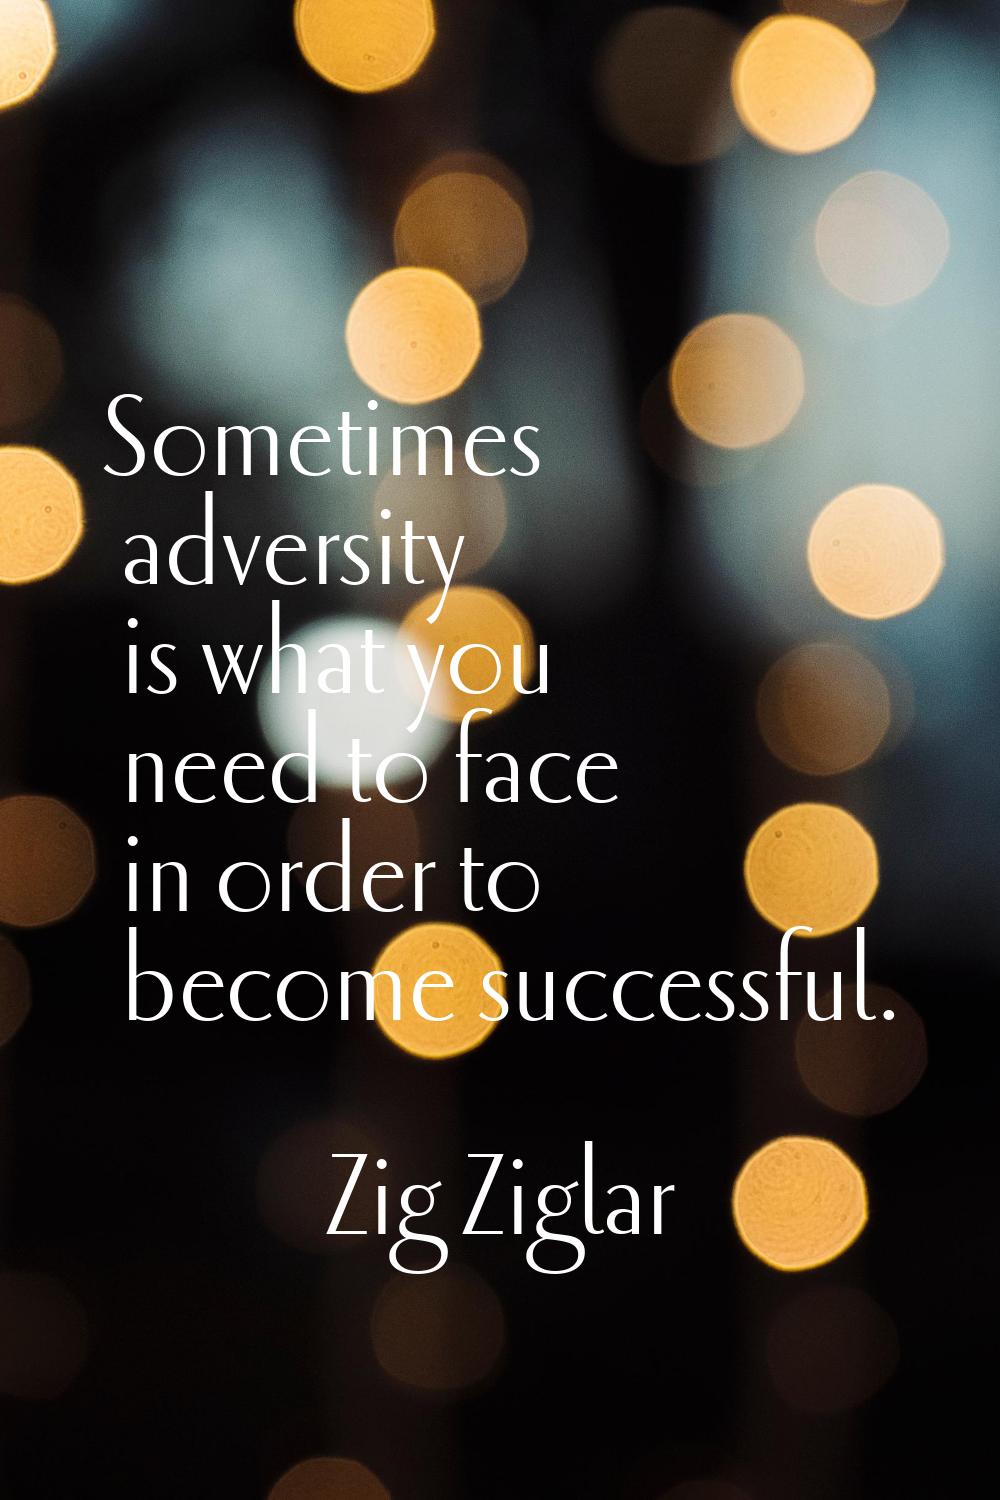 Sometimes adversity is what you need to face in order to become successful.